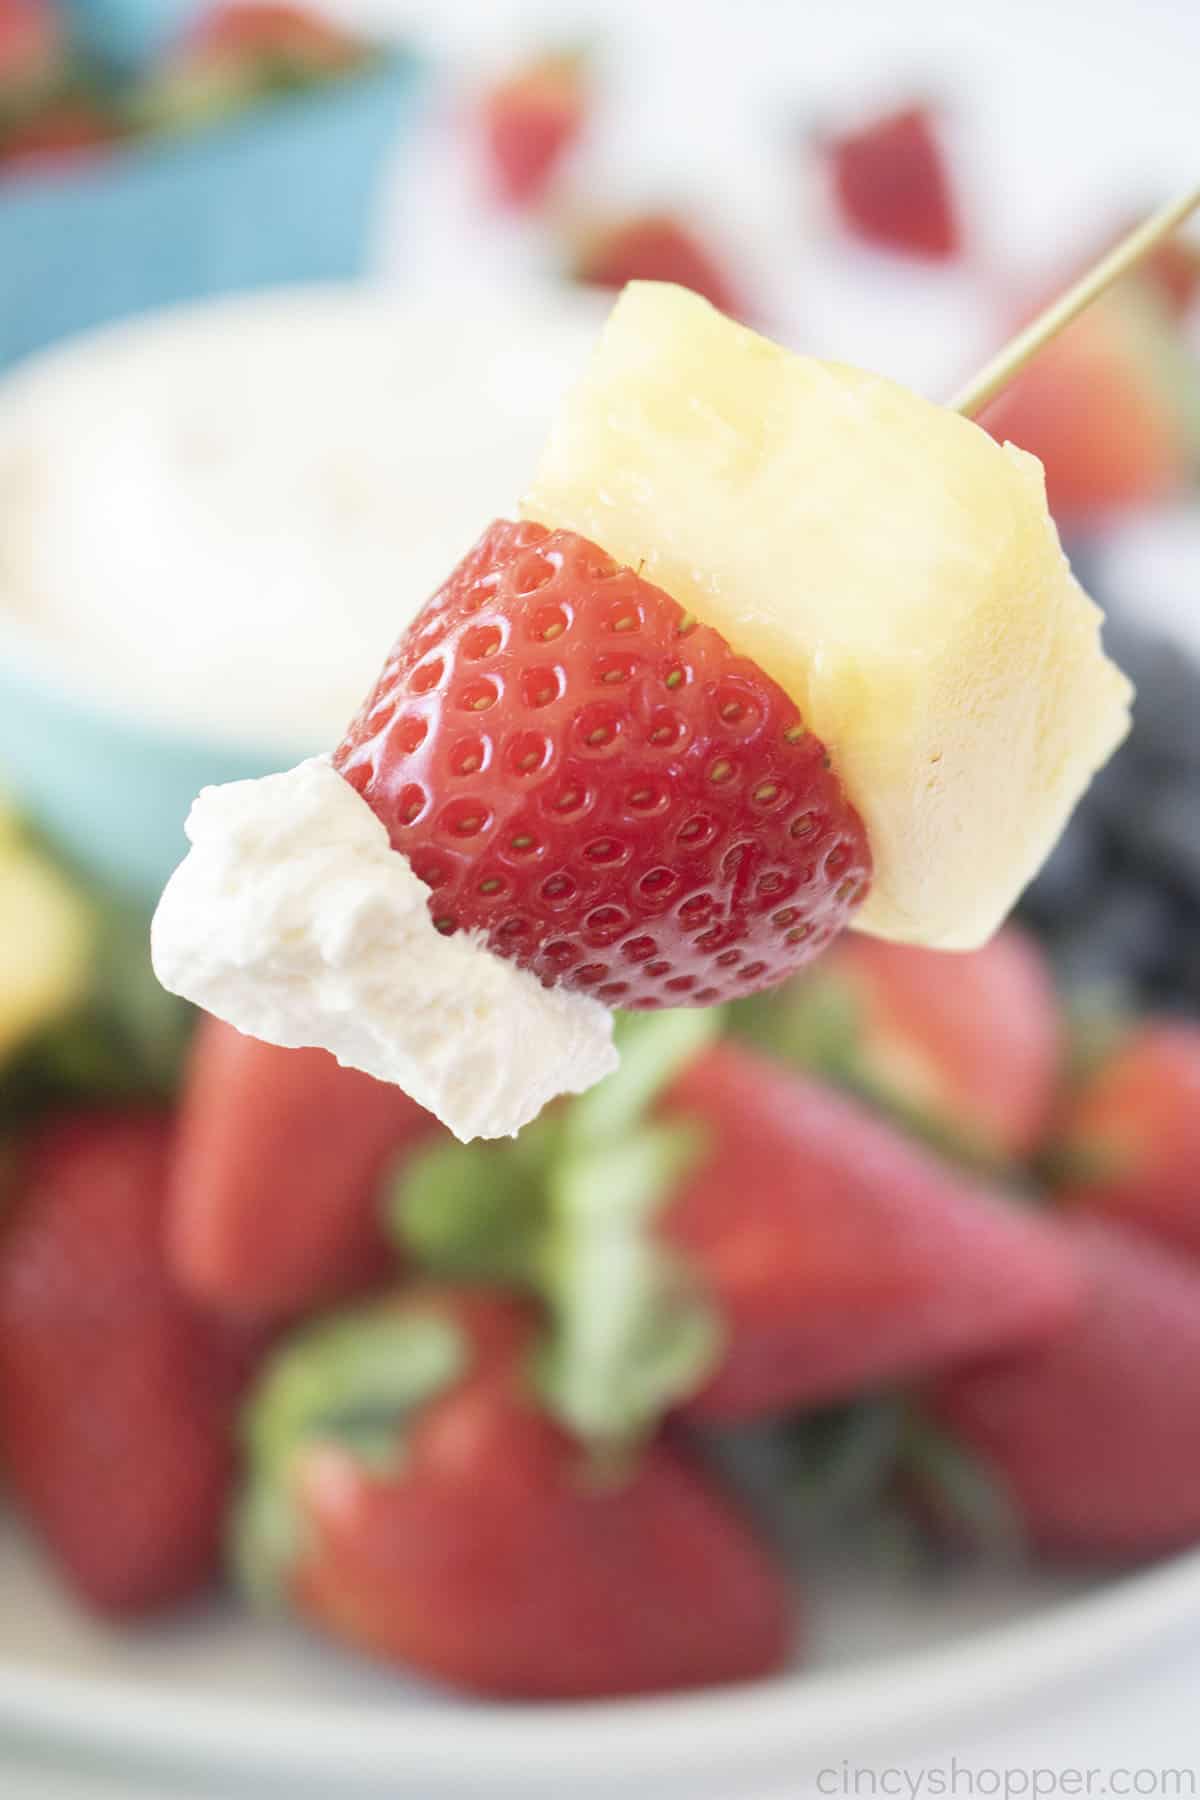 Strawberry and Pineapple on a skewer with Cool Whip Dip.